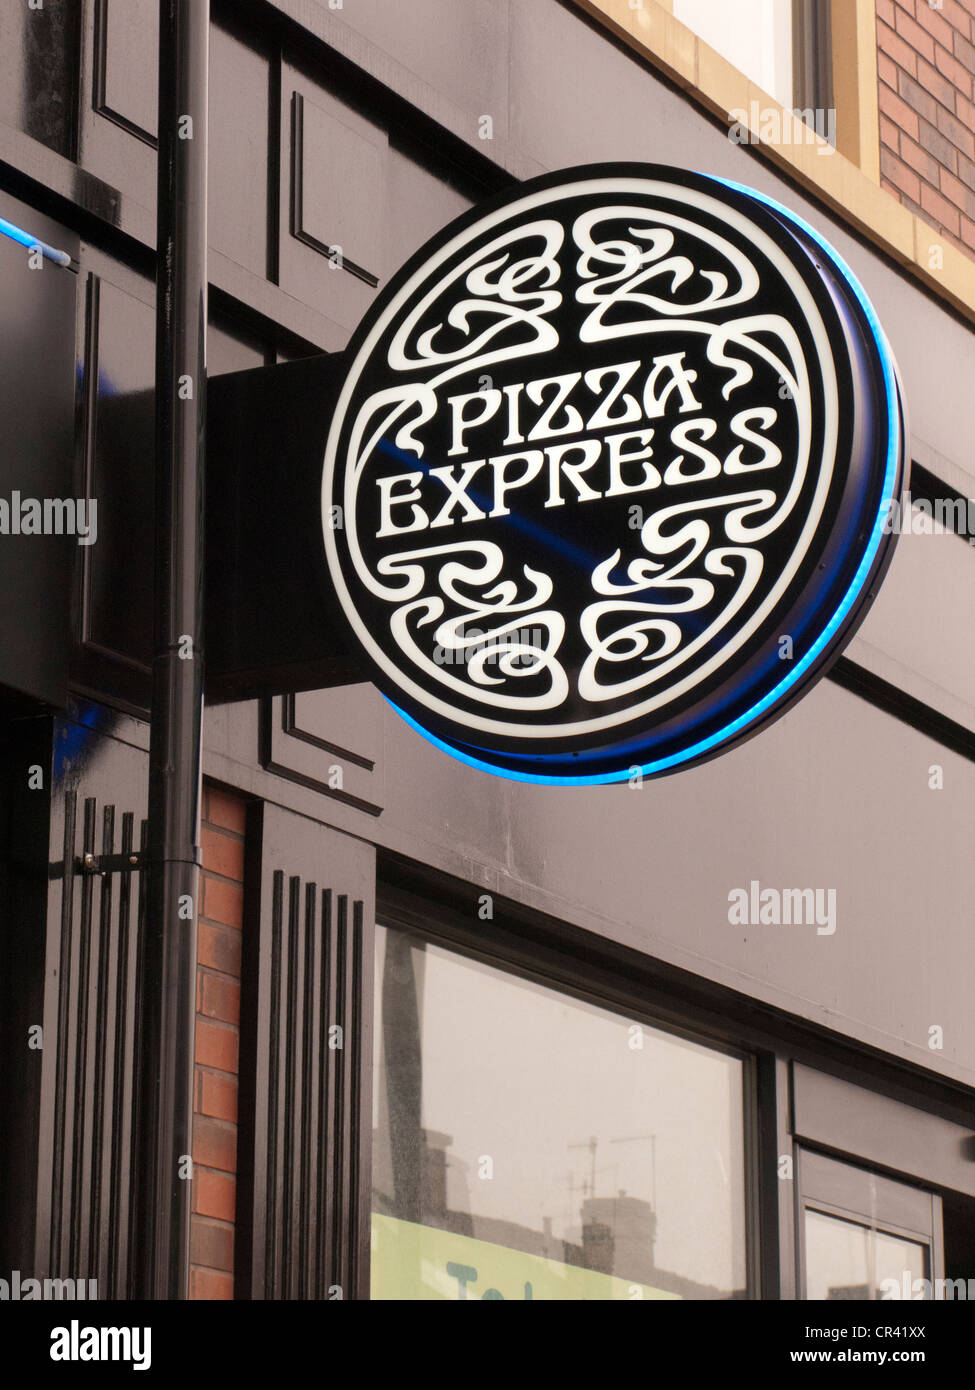 Pizza Express sign and logo Stock Photo